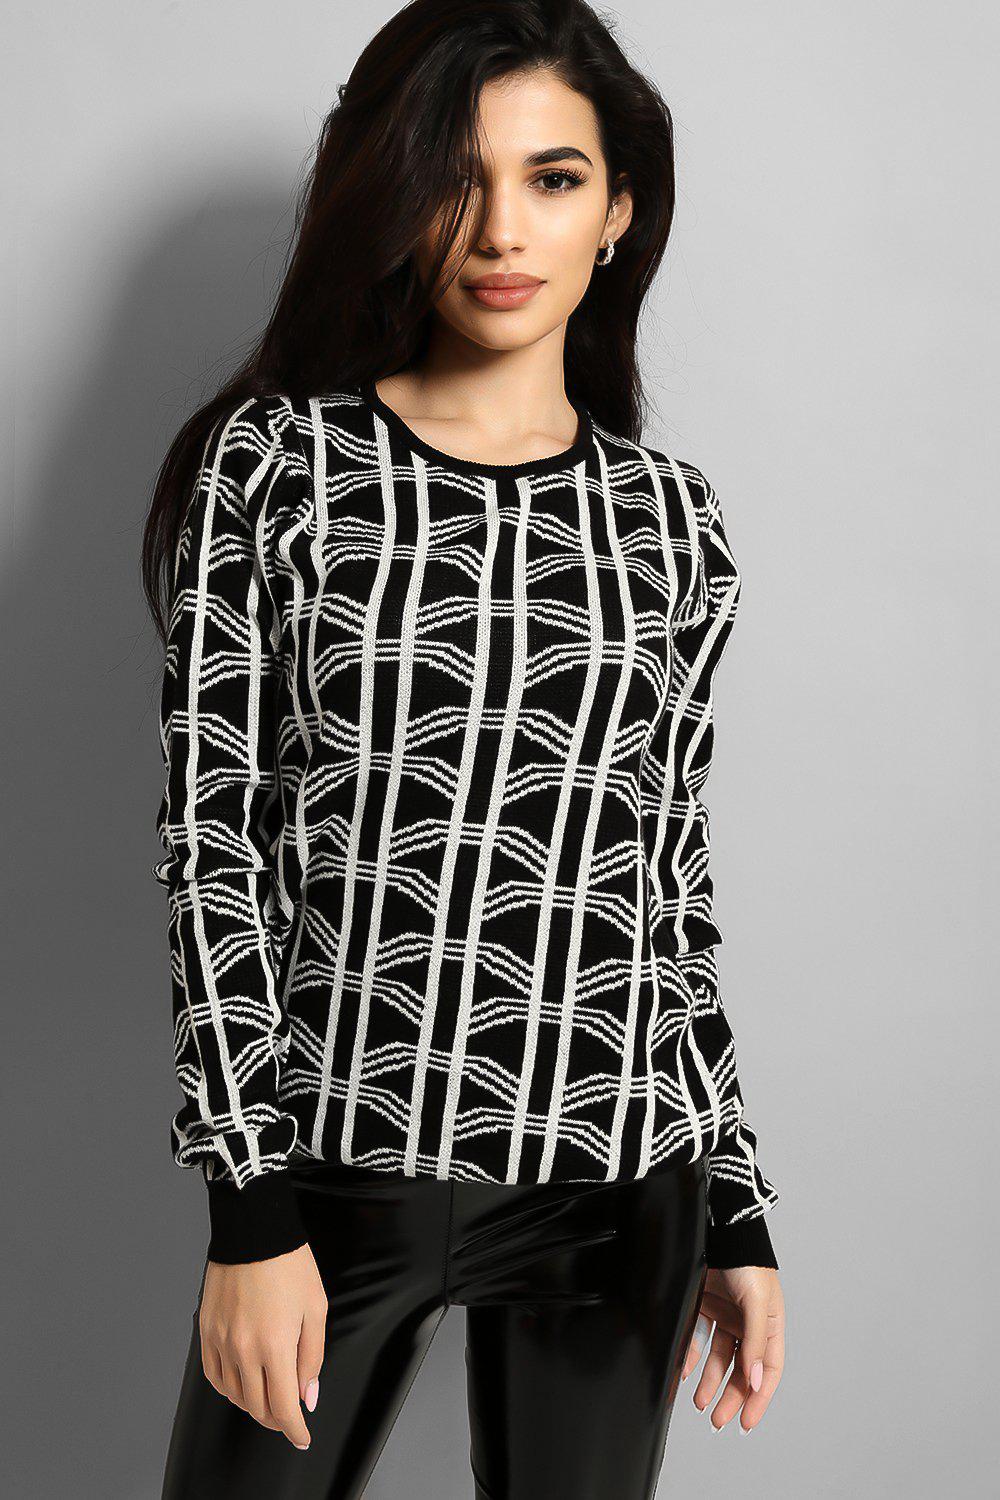 Black And White Knit Pattern Pullover – SinglePrice